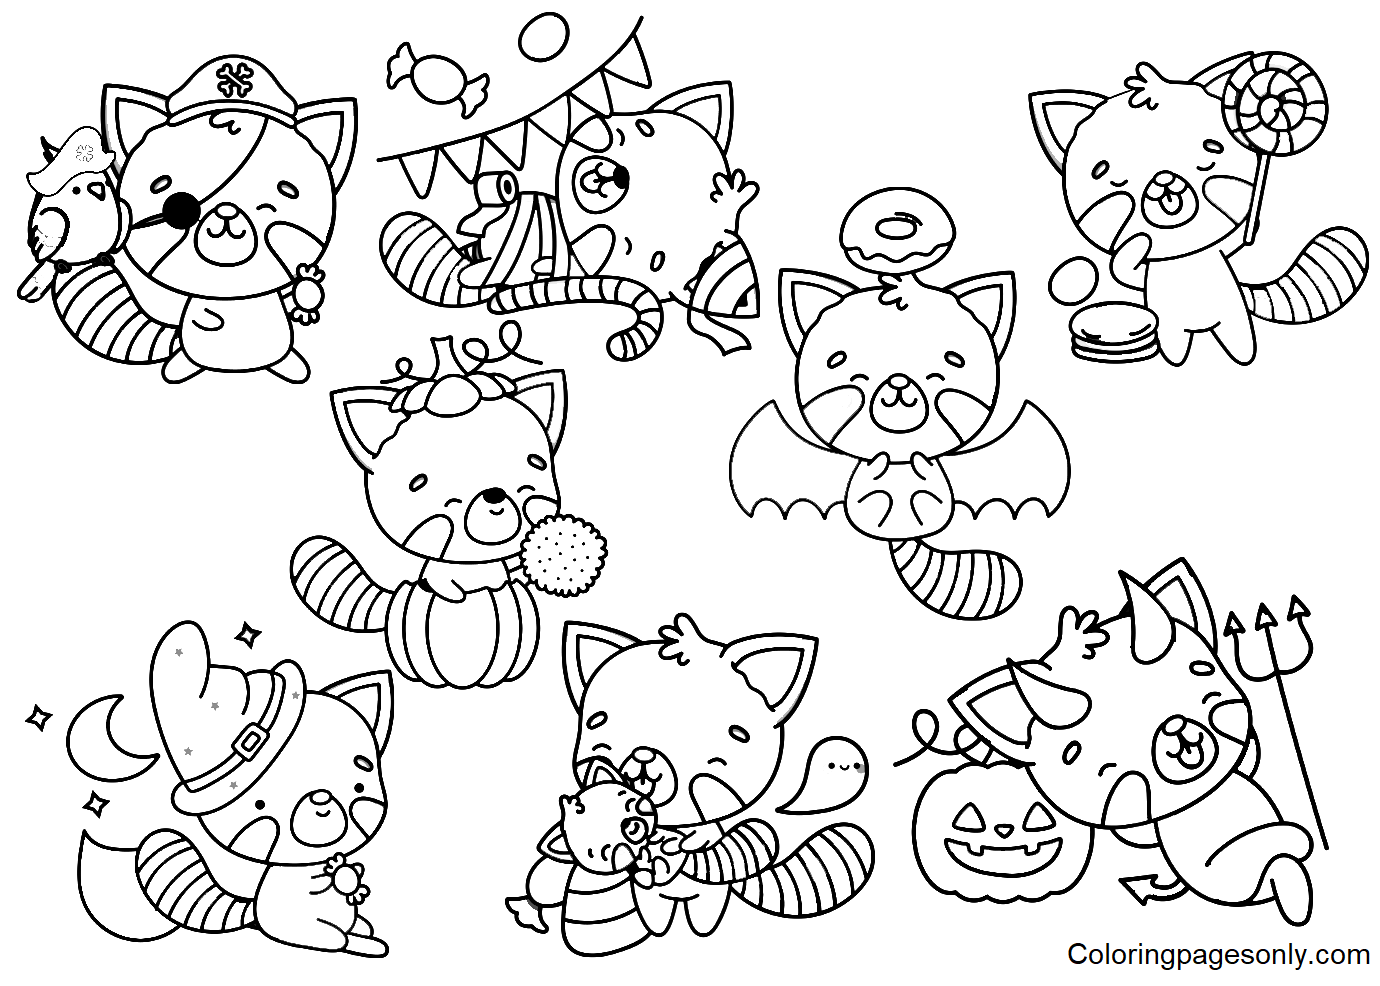 Halloween Red Panda Sticker Coloring Pages